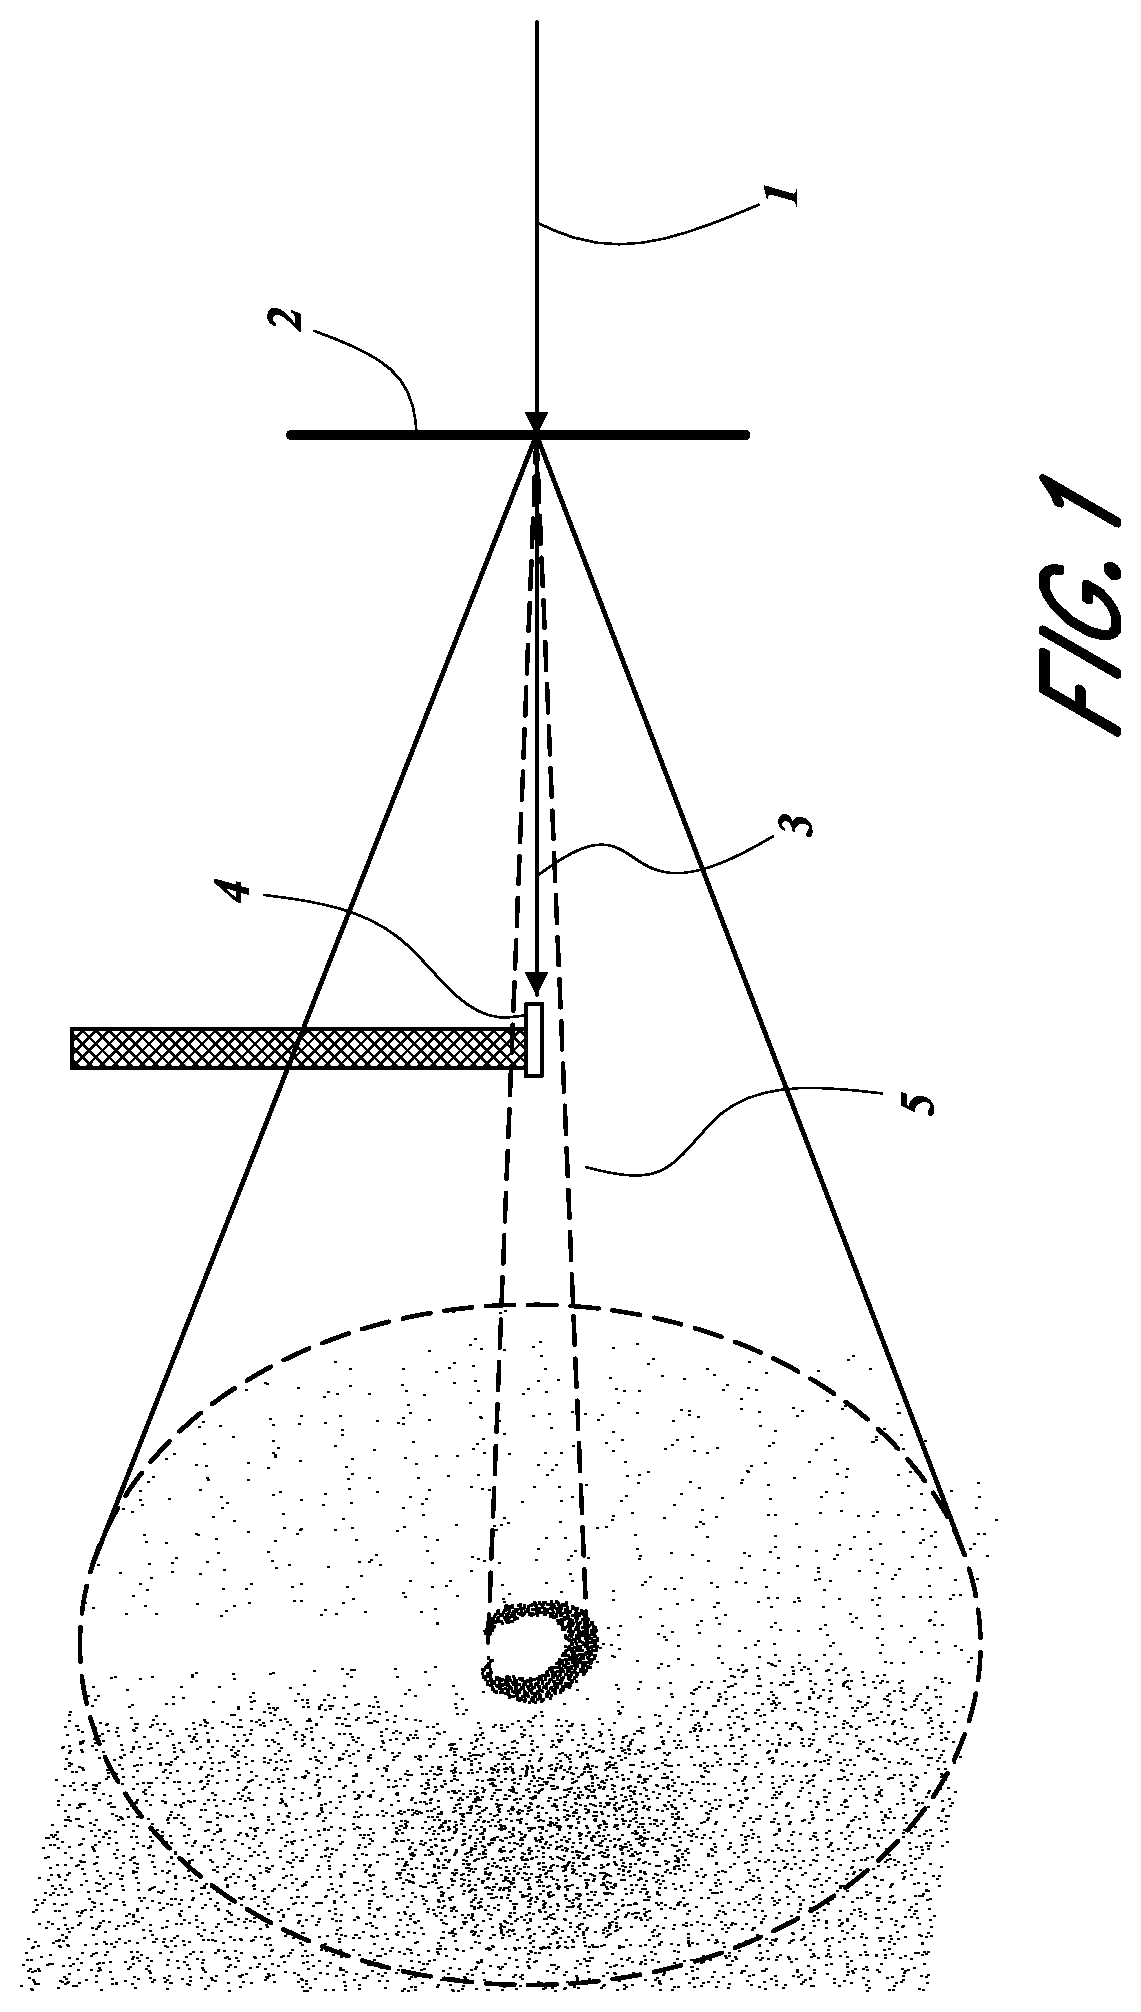 Method for the detection and/or diagnosis of eating disorders and malnutrition using X-ray diffraction